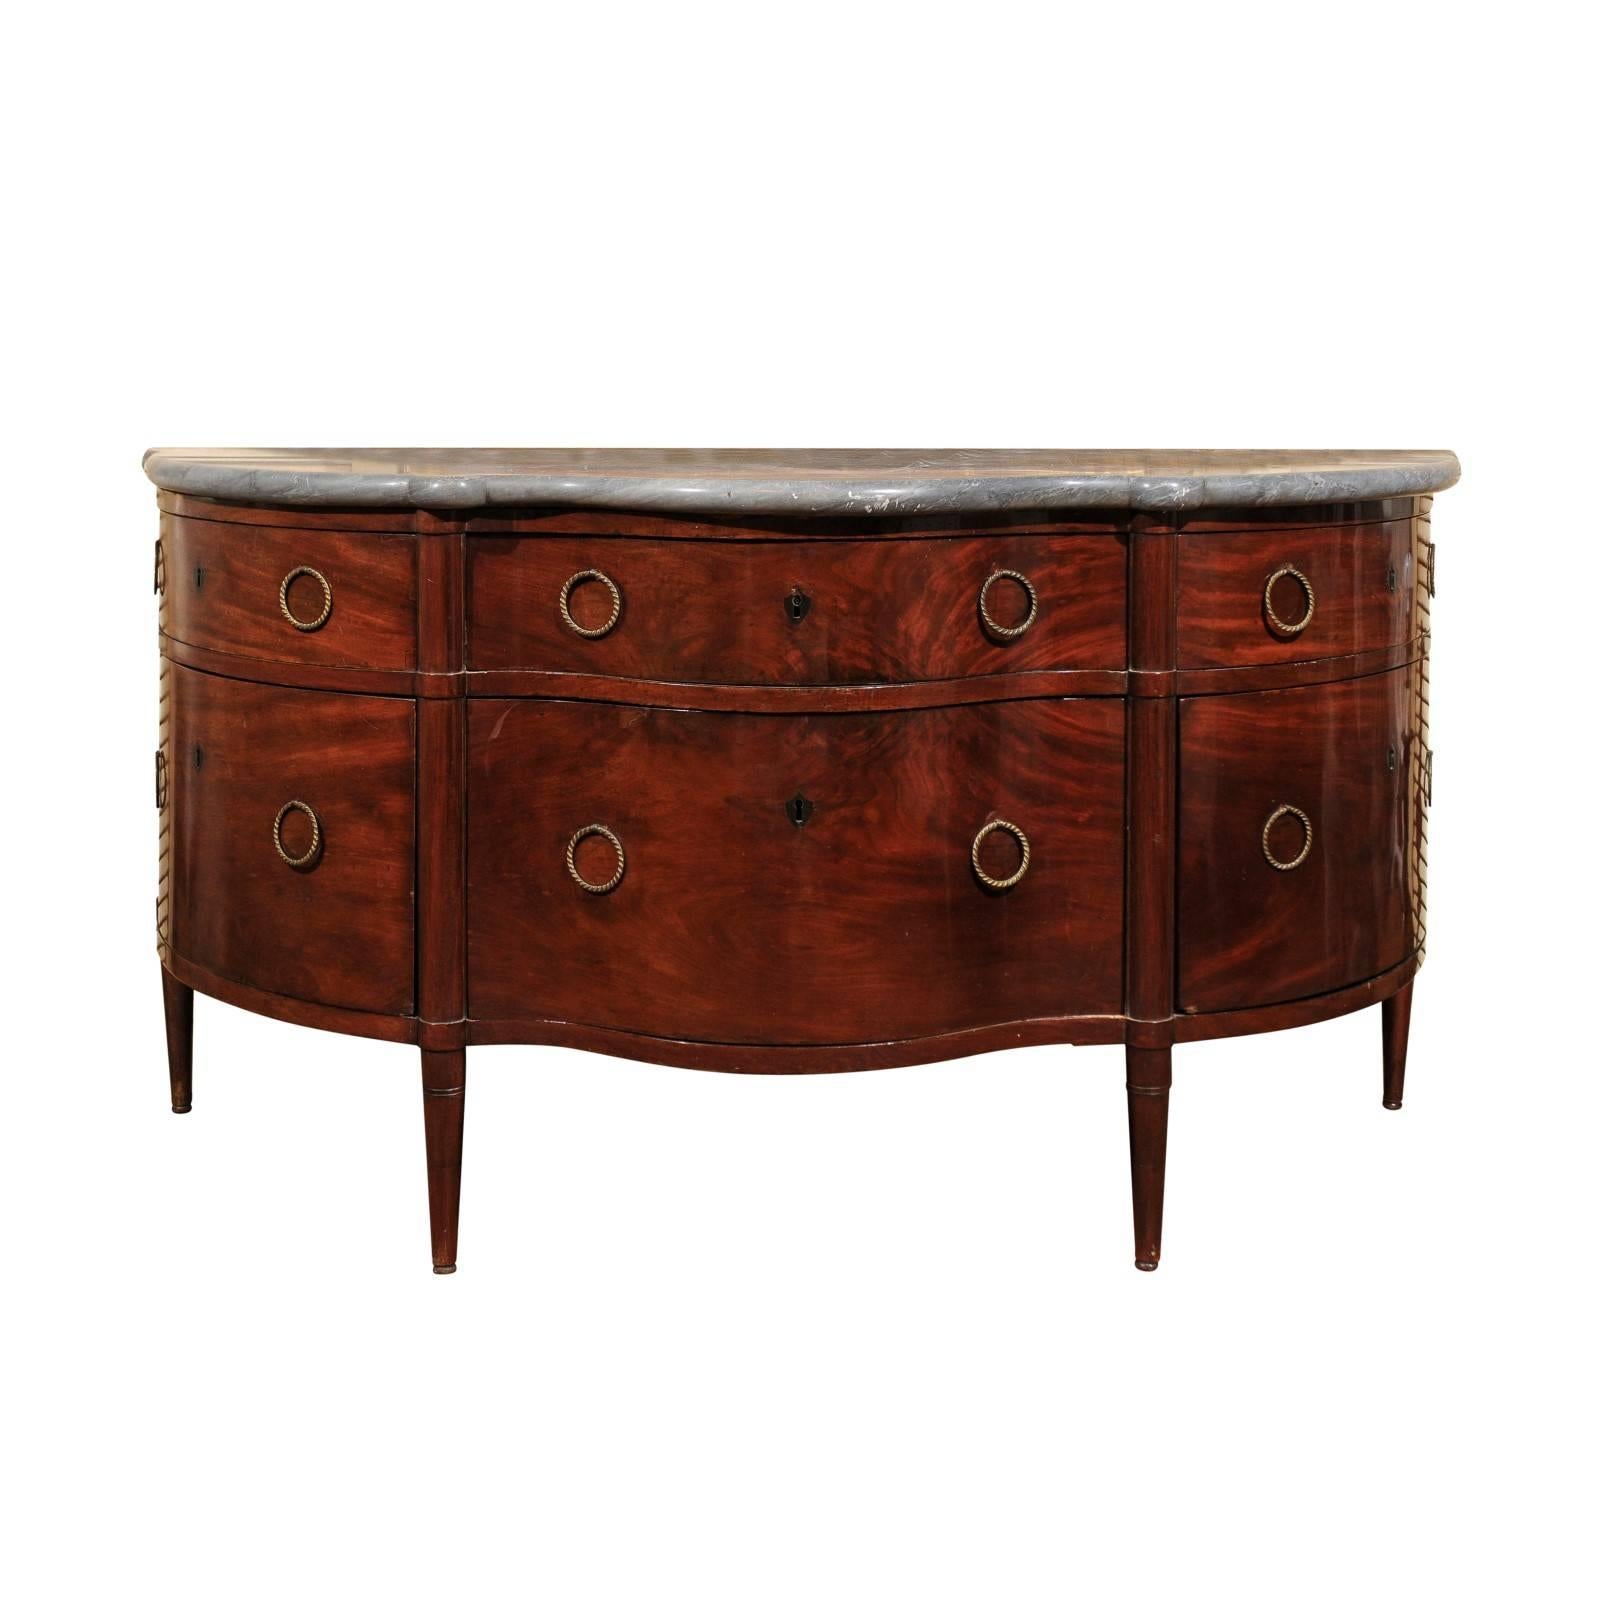 Italian Flaming Mahogany Buffet with Rounded Corners and Fold out Drawers, 1850s